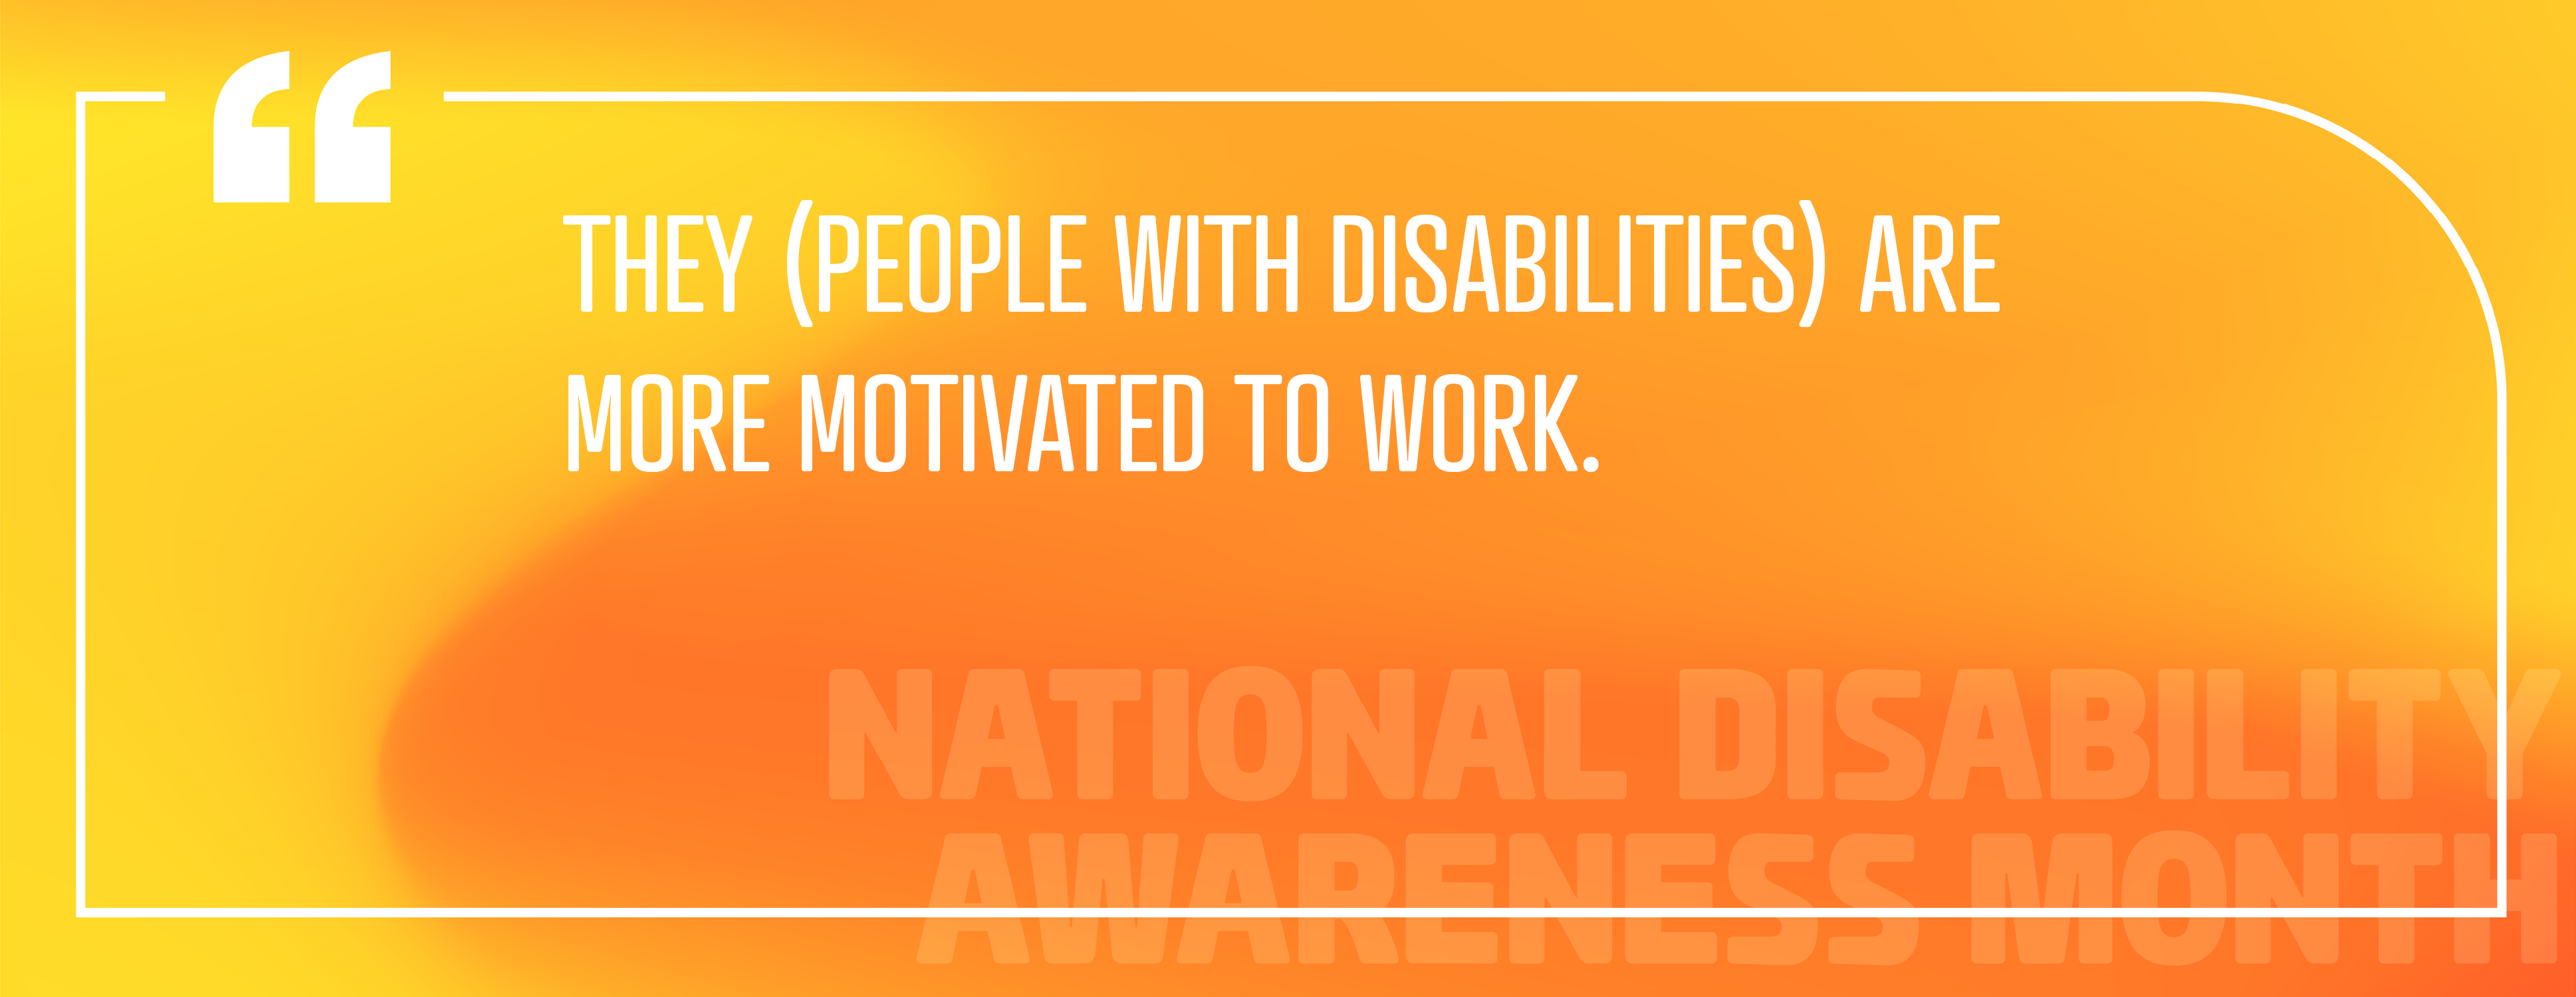 Image 5: Employment of Individuals with Disabilities